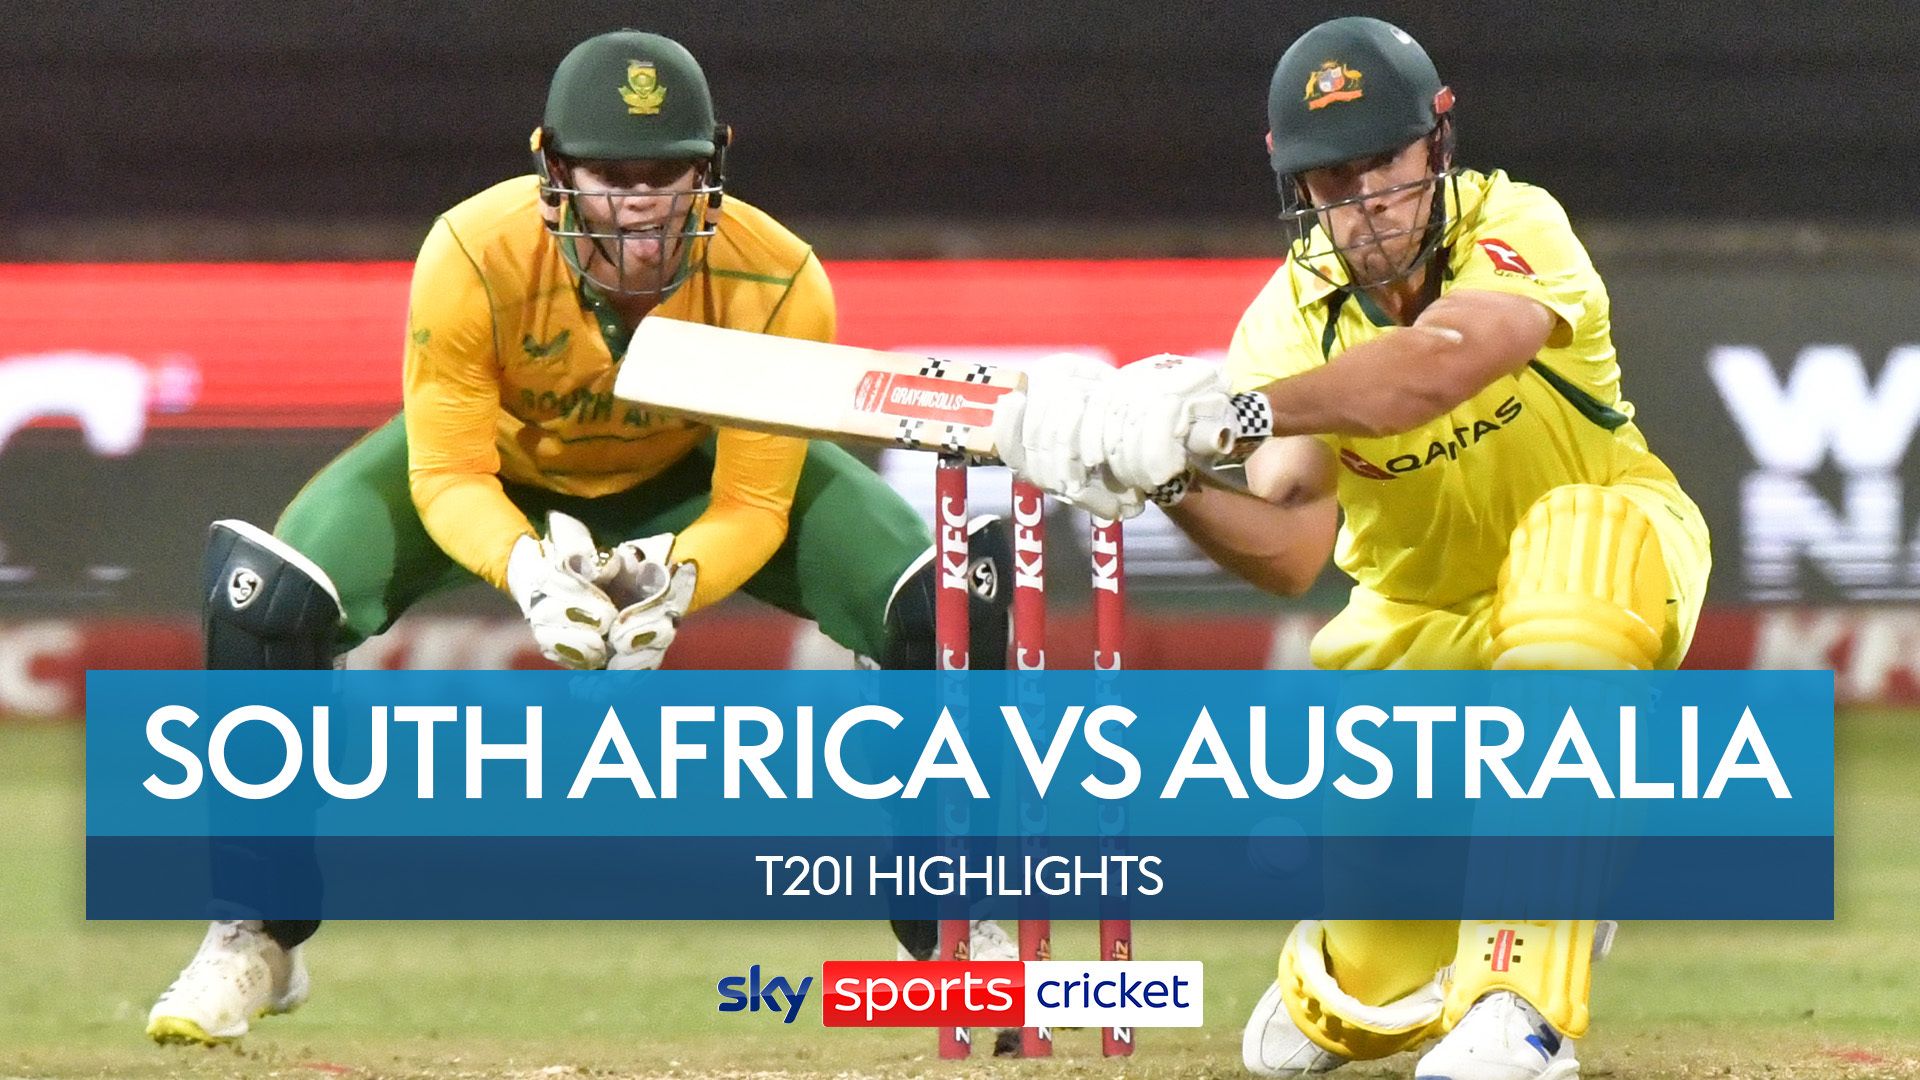 Highlights: Dominant Australia secure T20 series win over South Africa